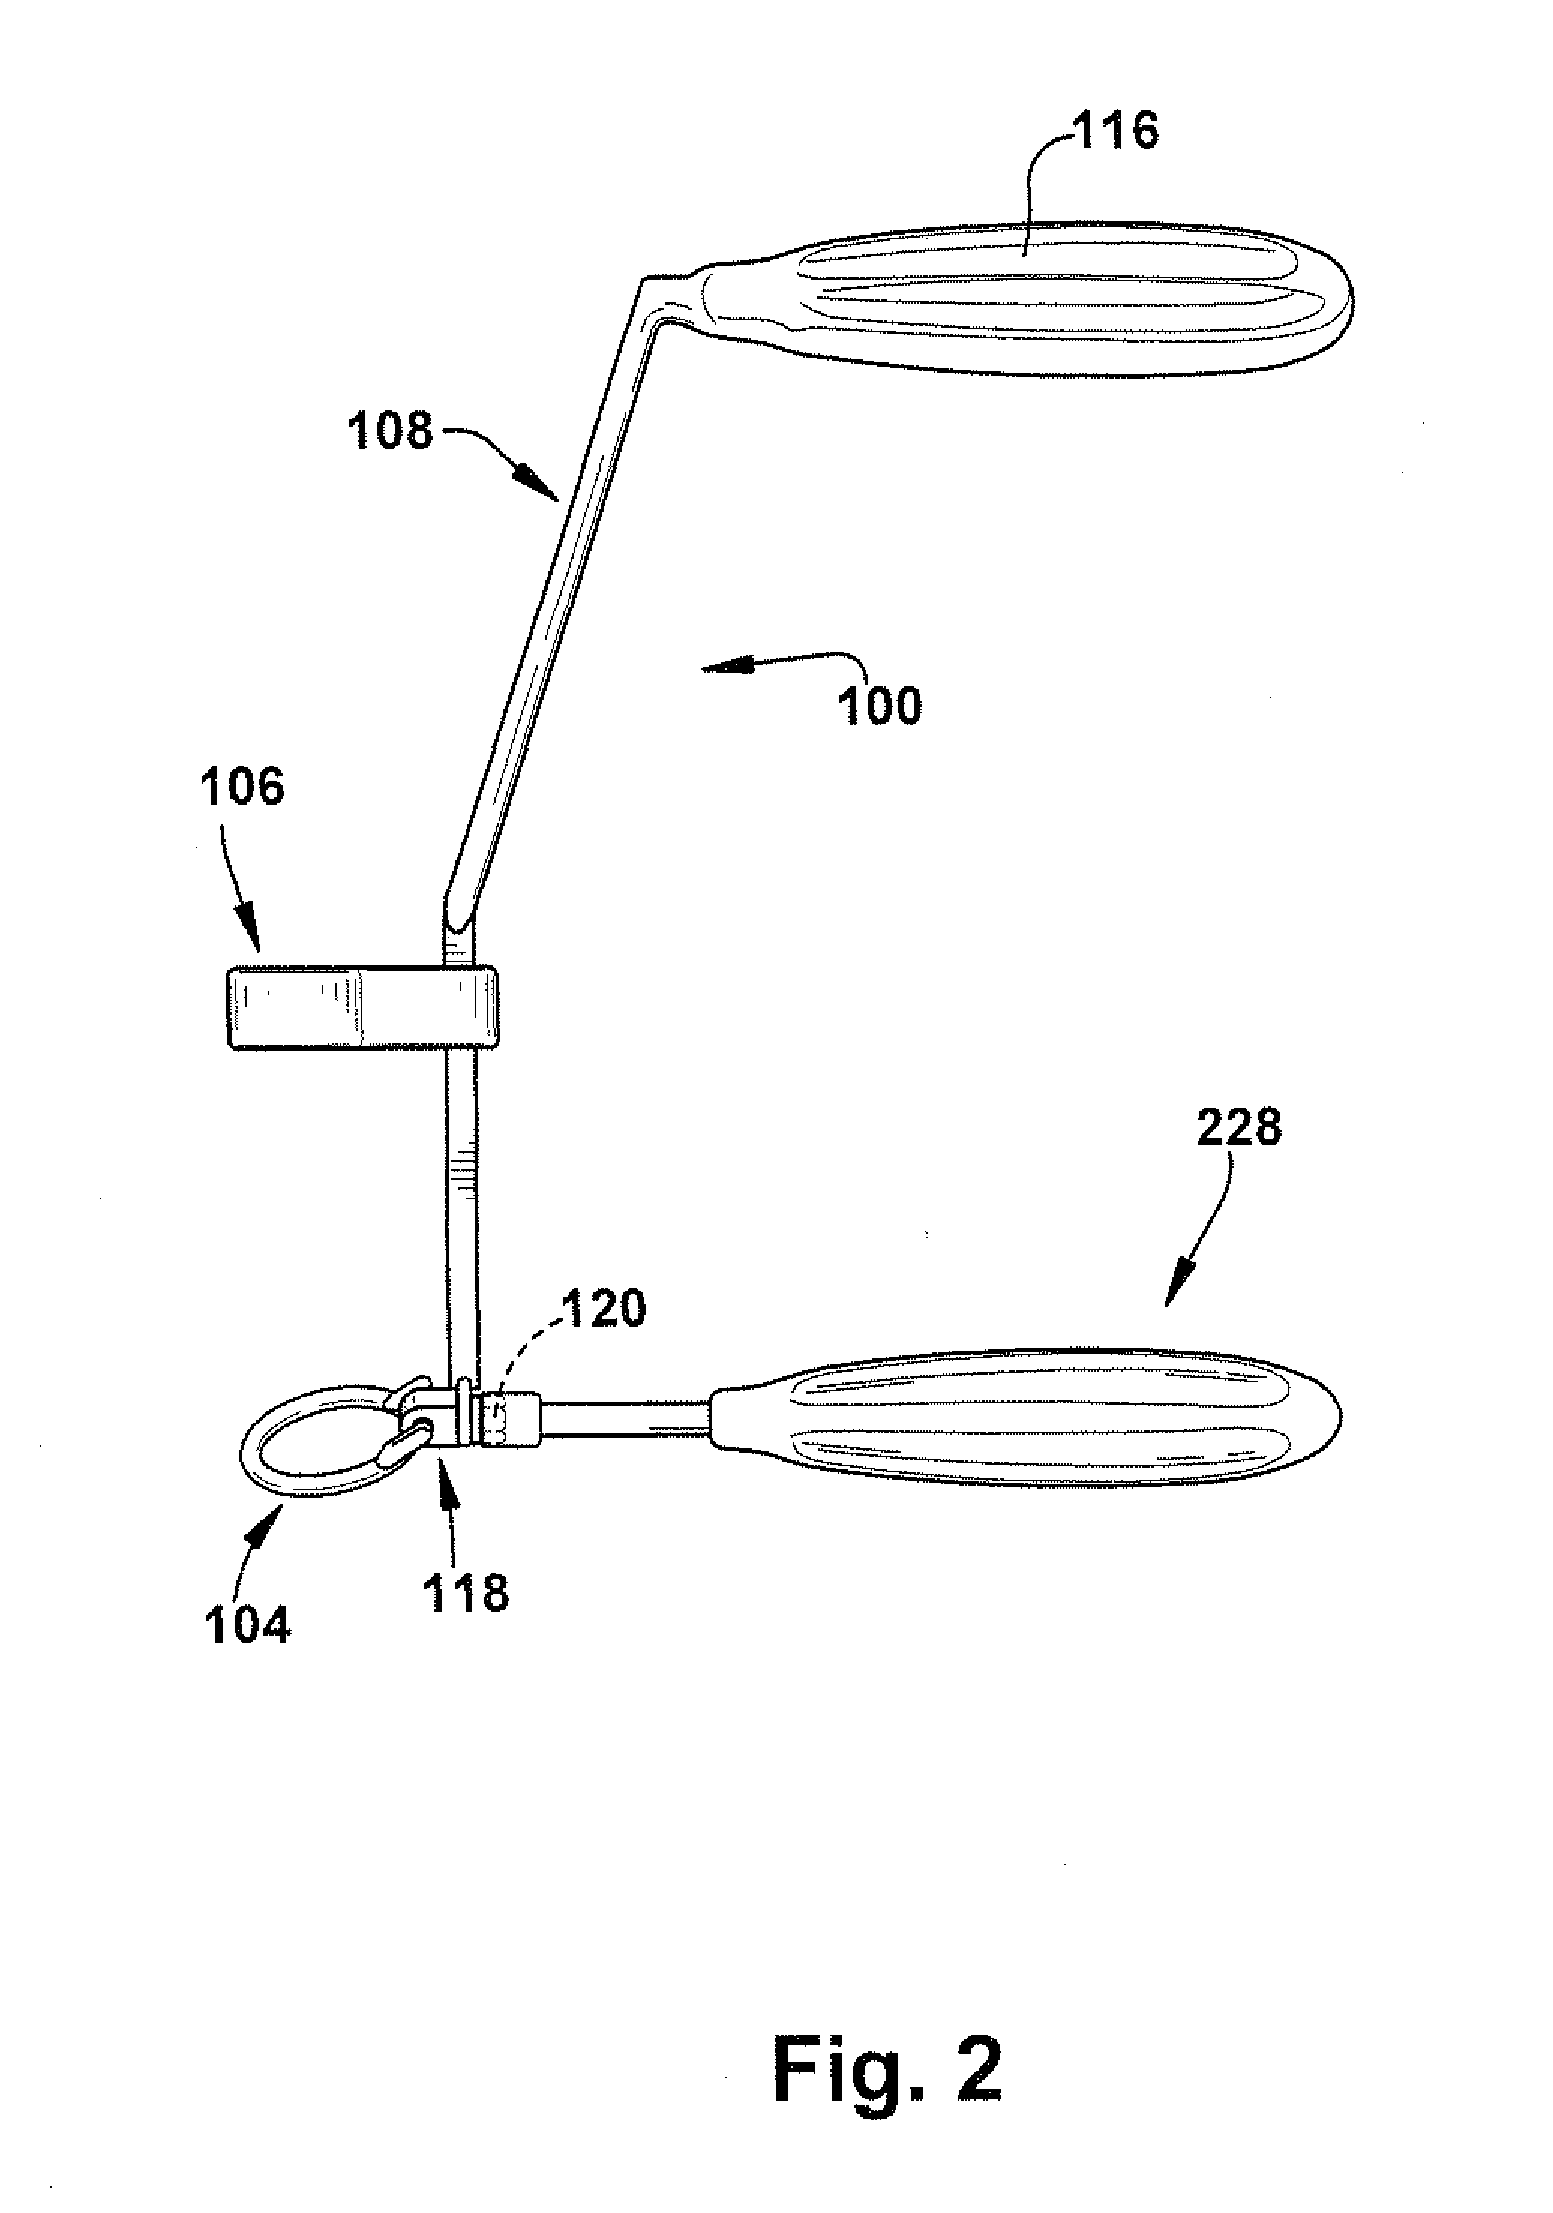 Method and apparatus for insertion of an elongate pin into a surface